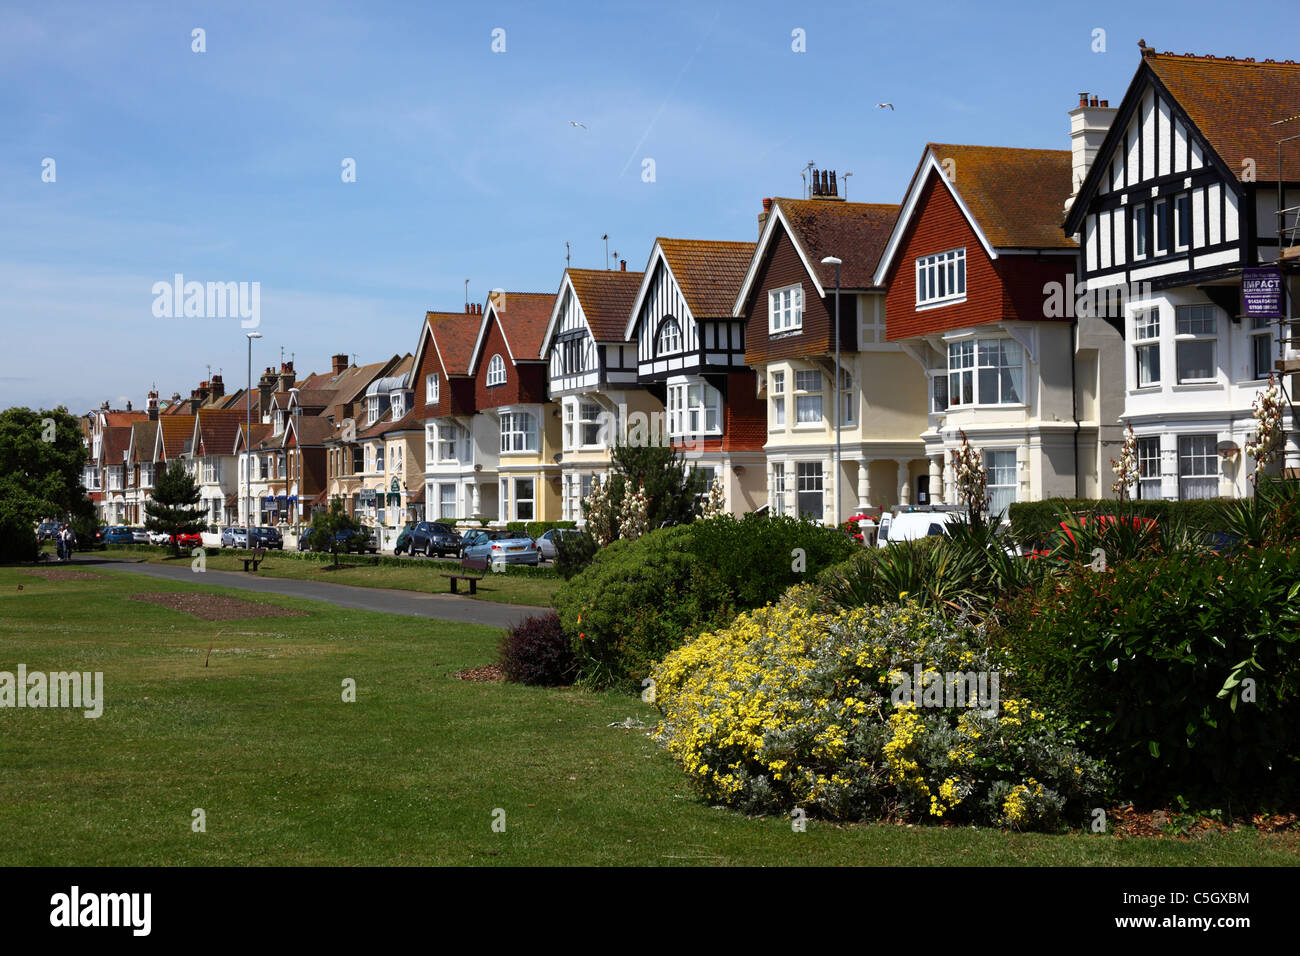 West Marina Gardens and houses, St Leonards on Sea, East Sussex, England Stock Photo